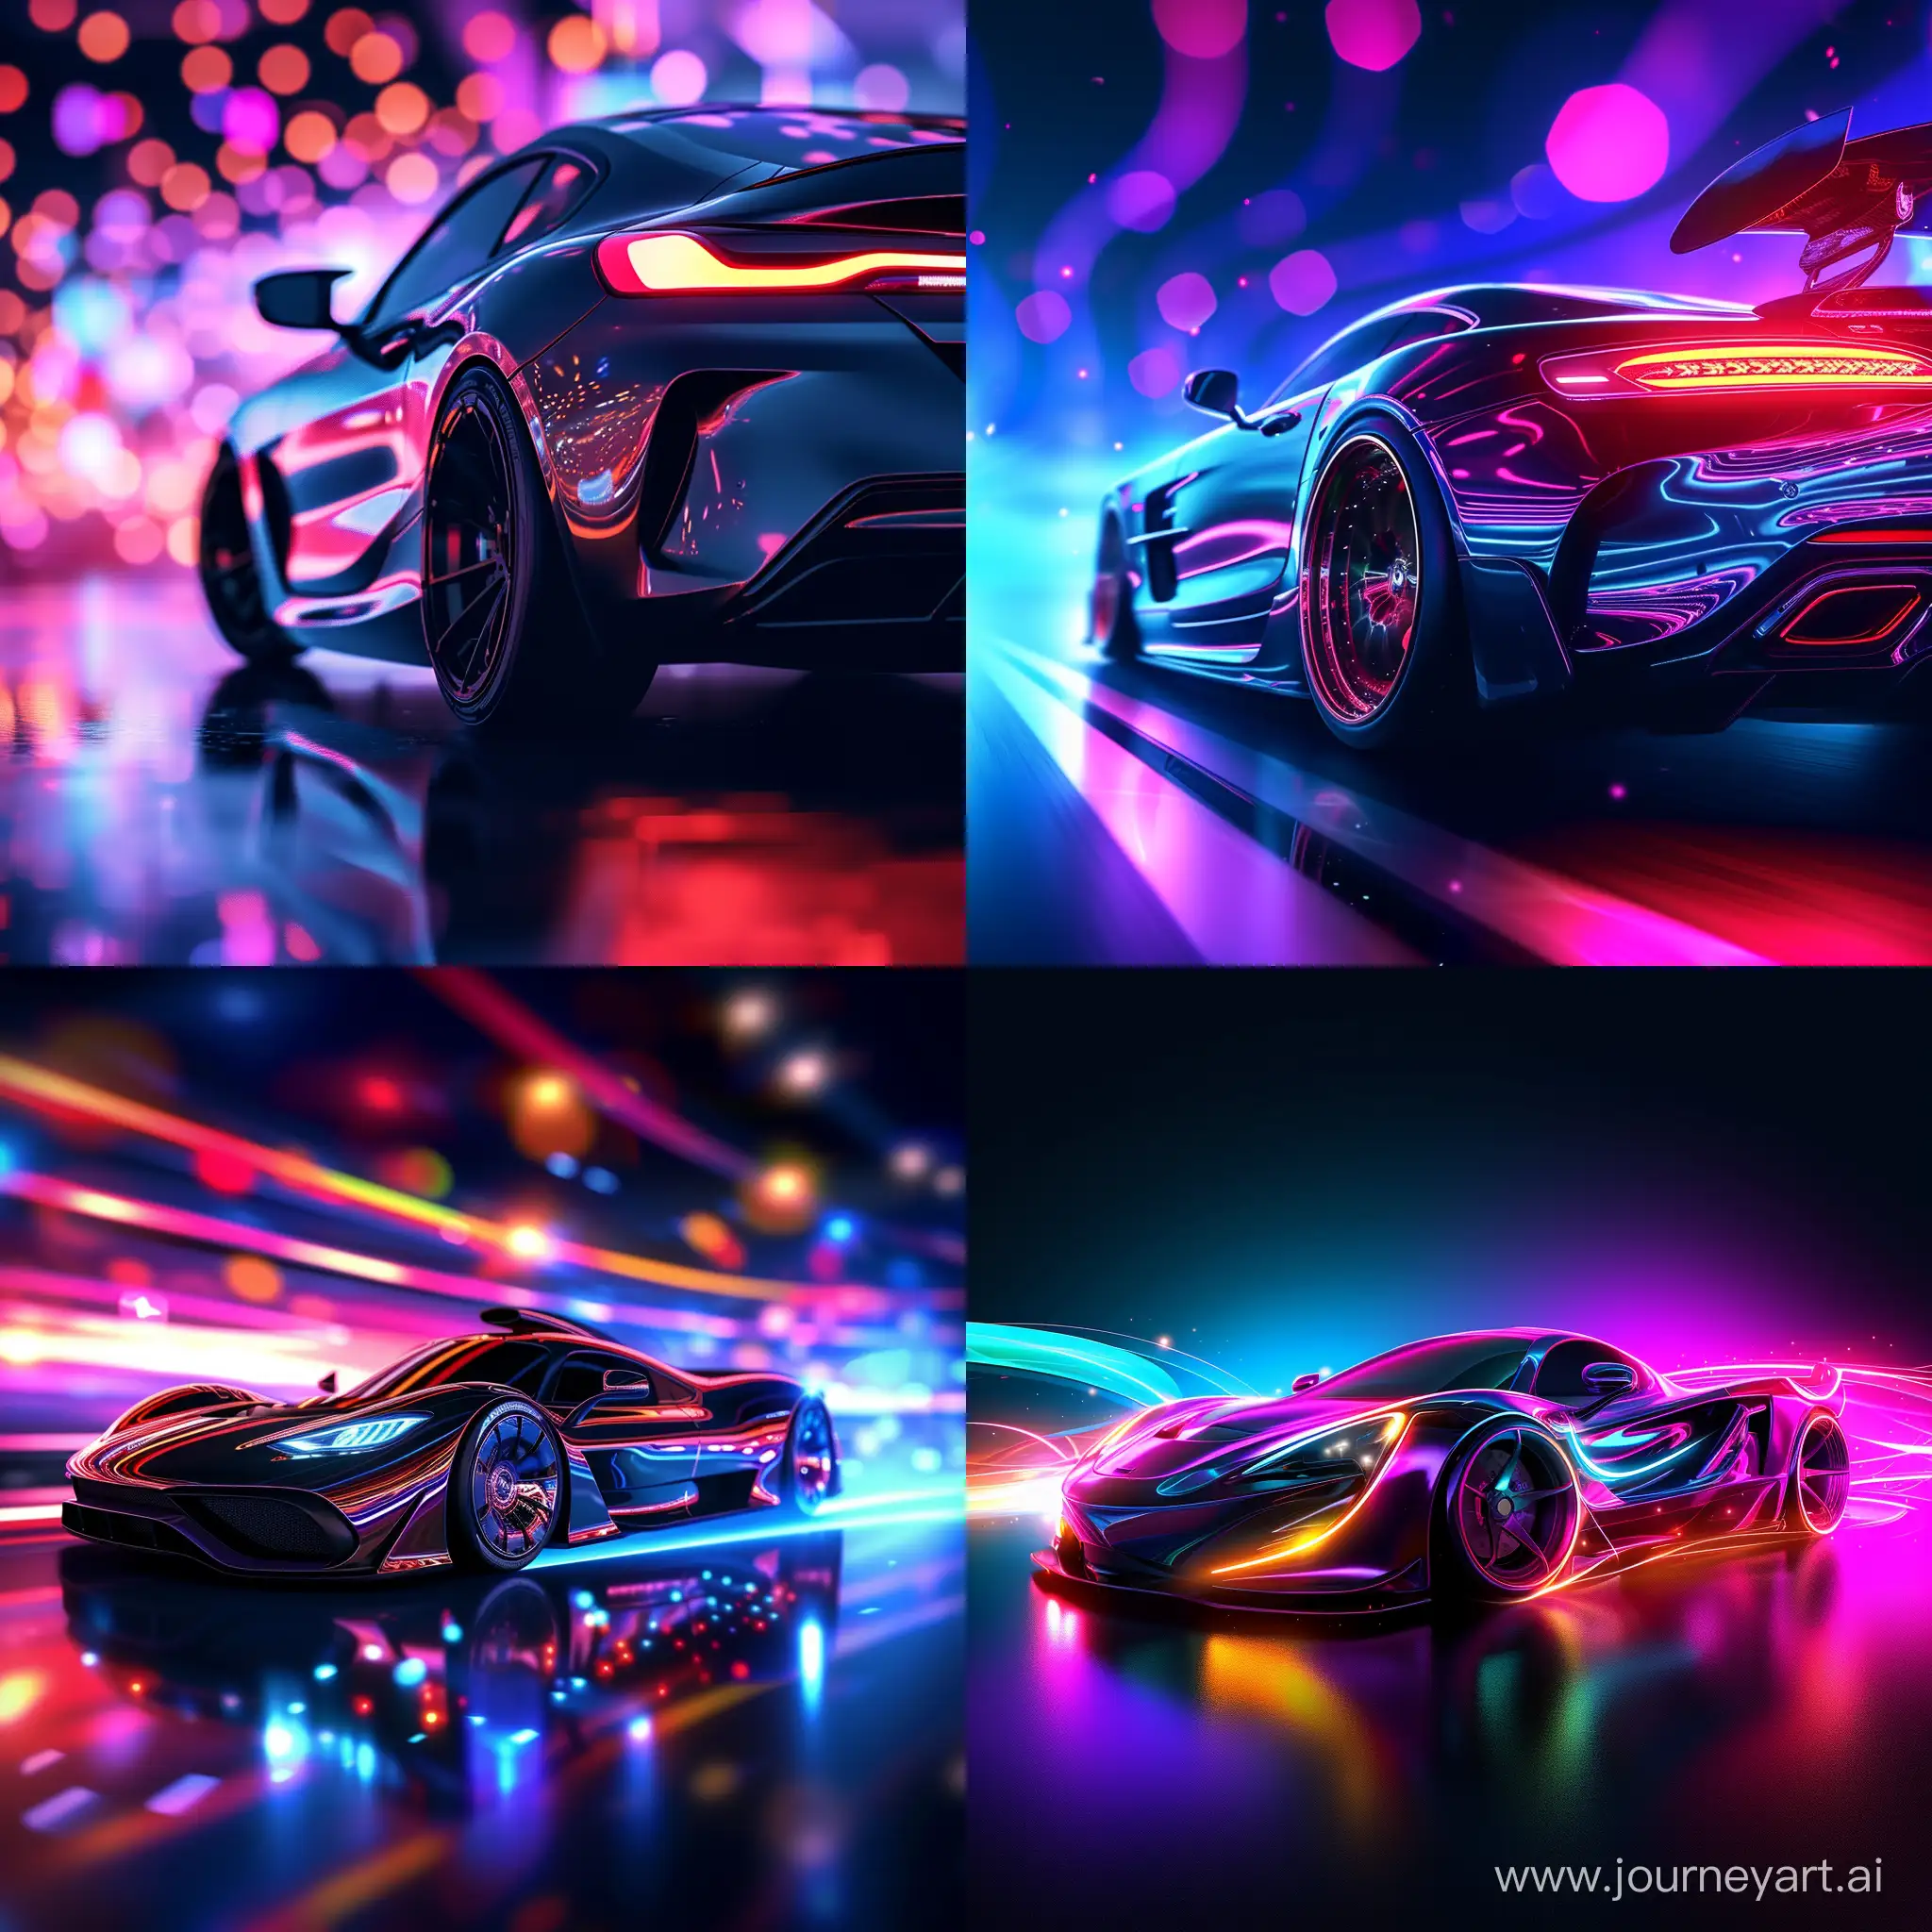 Spectacular-Night-Lights-Showcase-Featuring-the-Latest-Modern-Car-Model